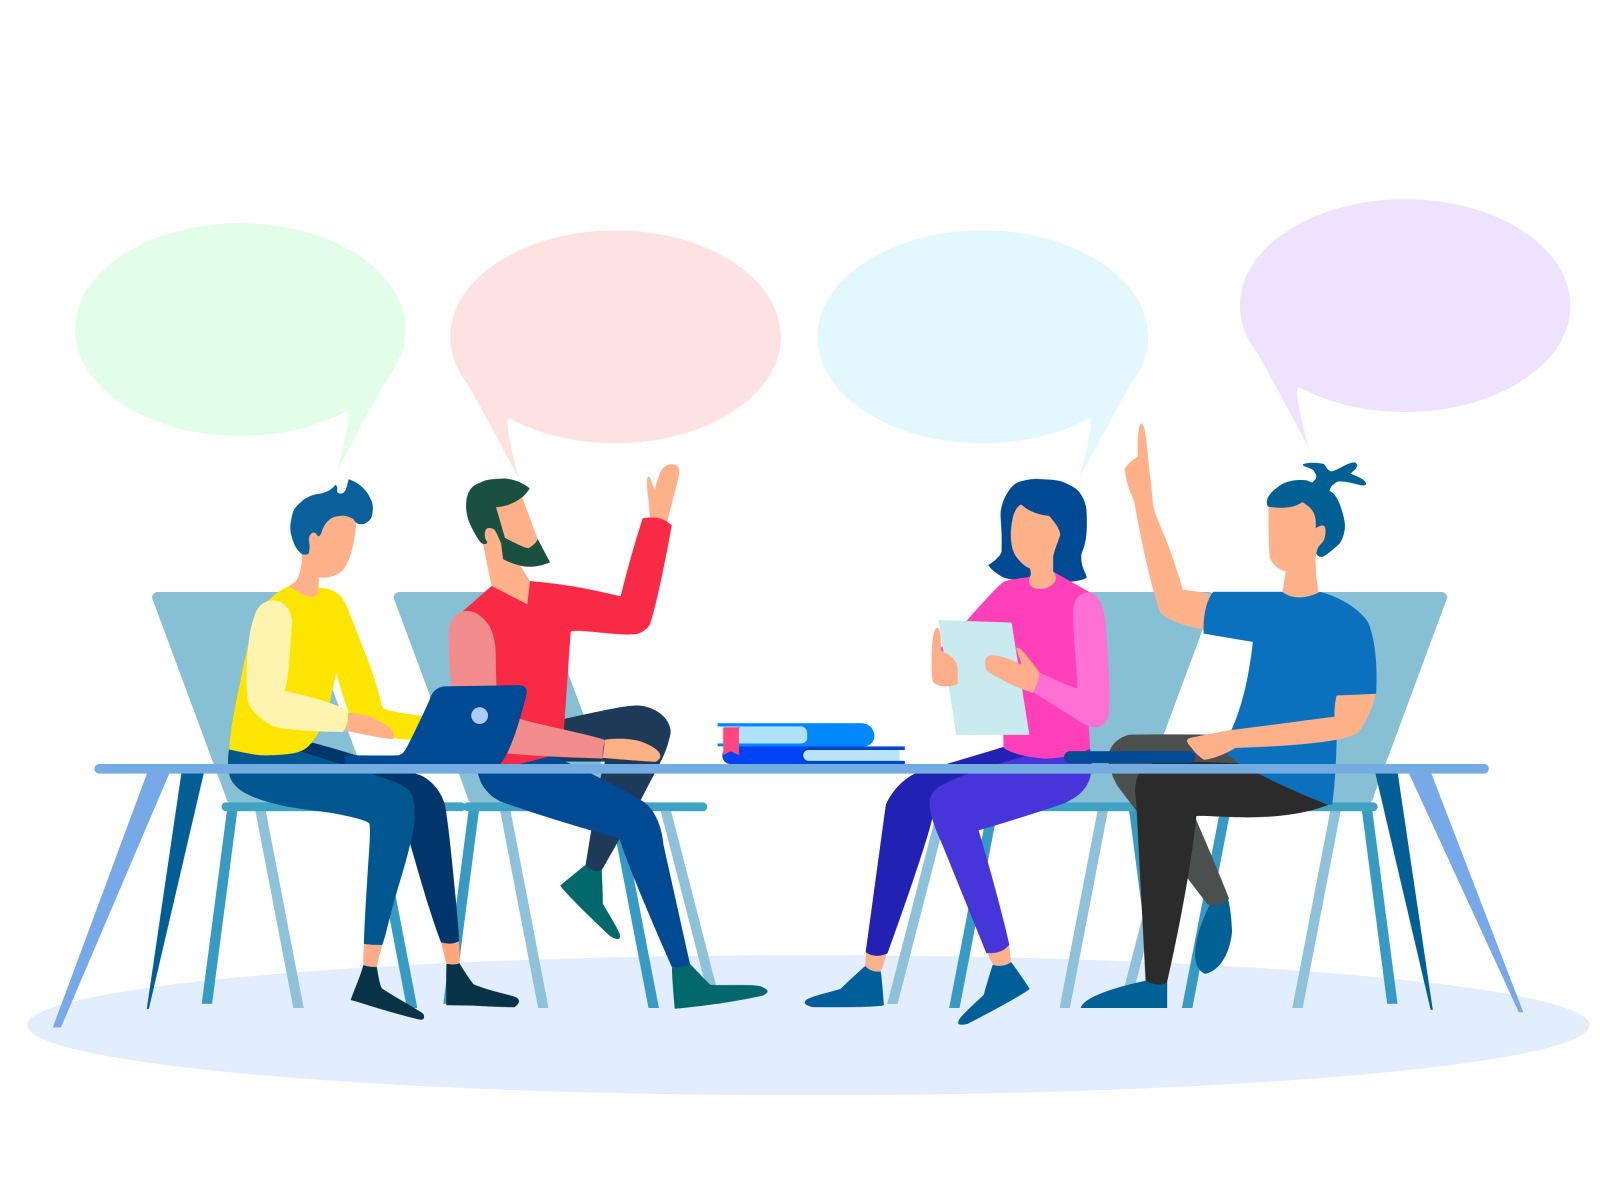 Group Meetings & Discussion by Sundhar on Dribbble